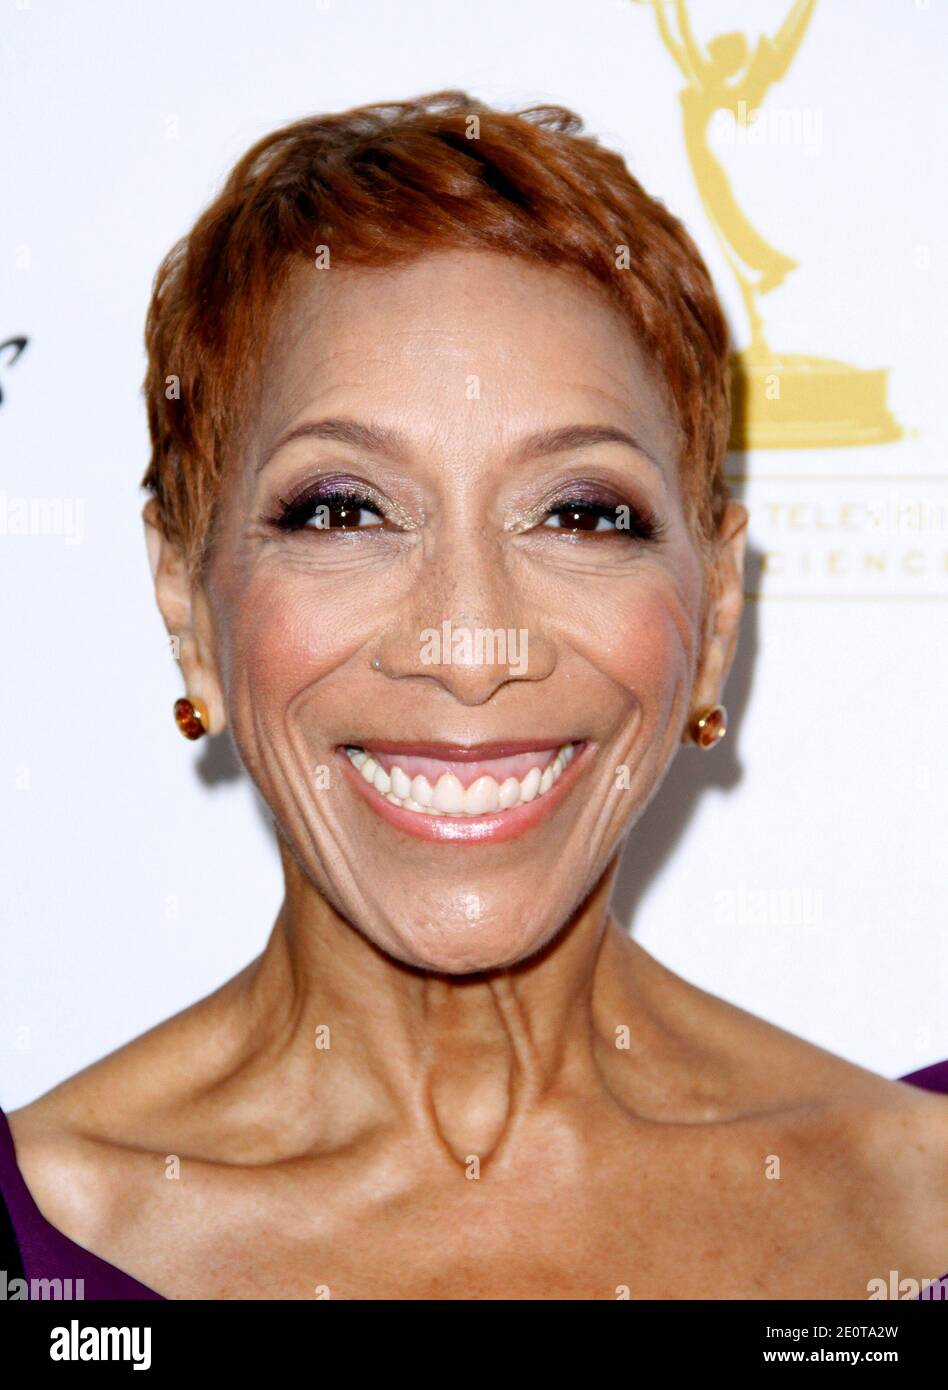 Rita Owens attends the Steel Magnolias Premiere at the Paris Theater in New York City, NY, USA, on October 3, 2012. Photo by Donna Ward/ABACAPRESS.COM Stock Photo